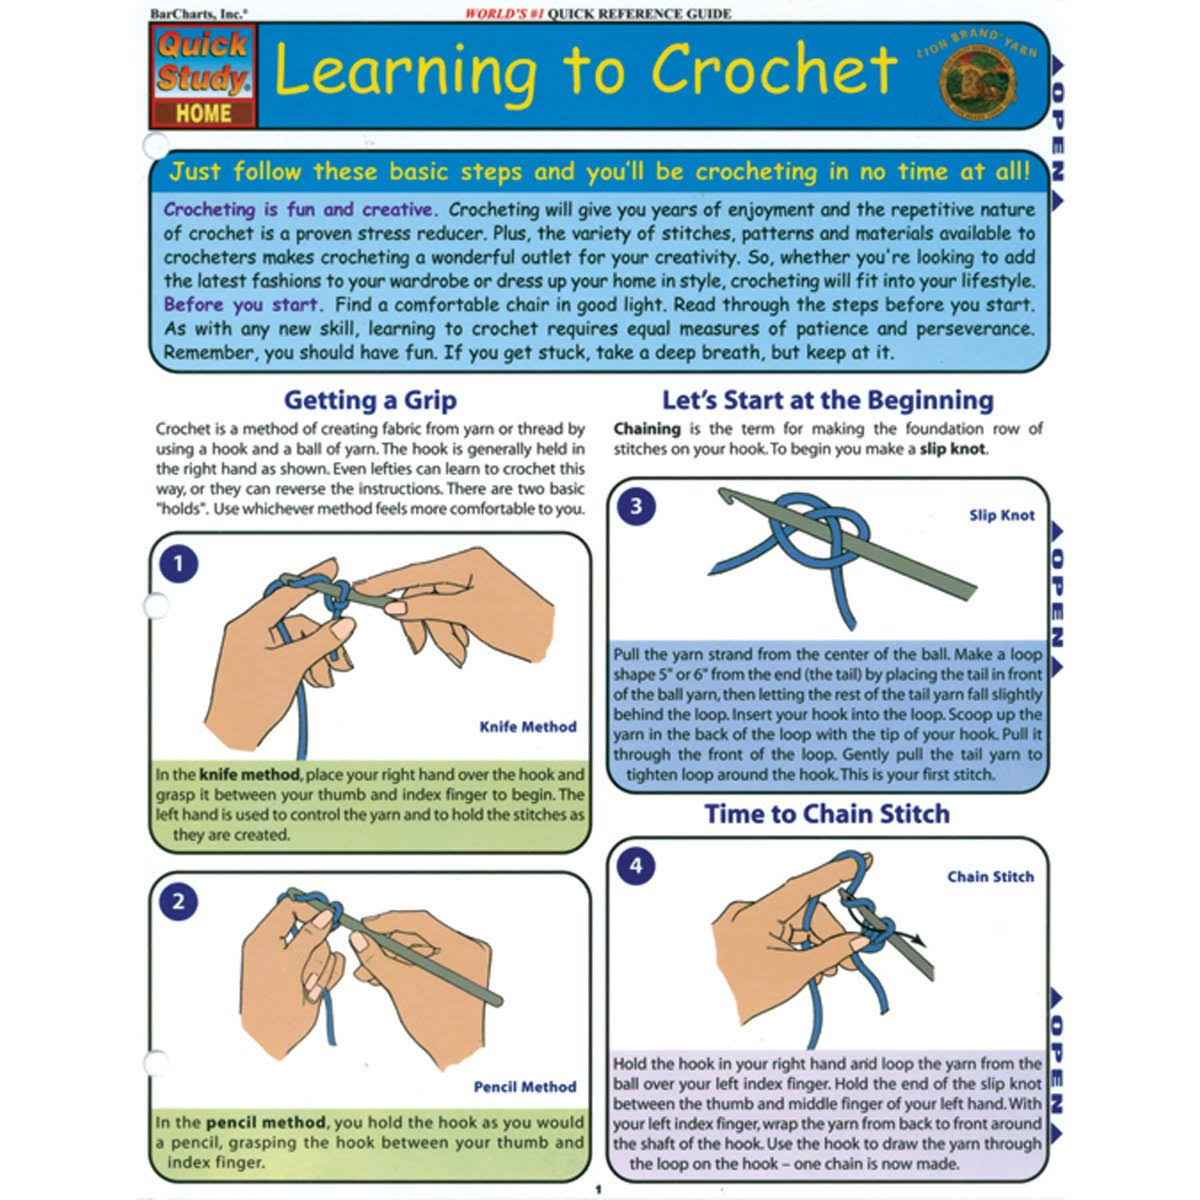 Quickstudy Learning To Crochet Reference Guide